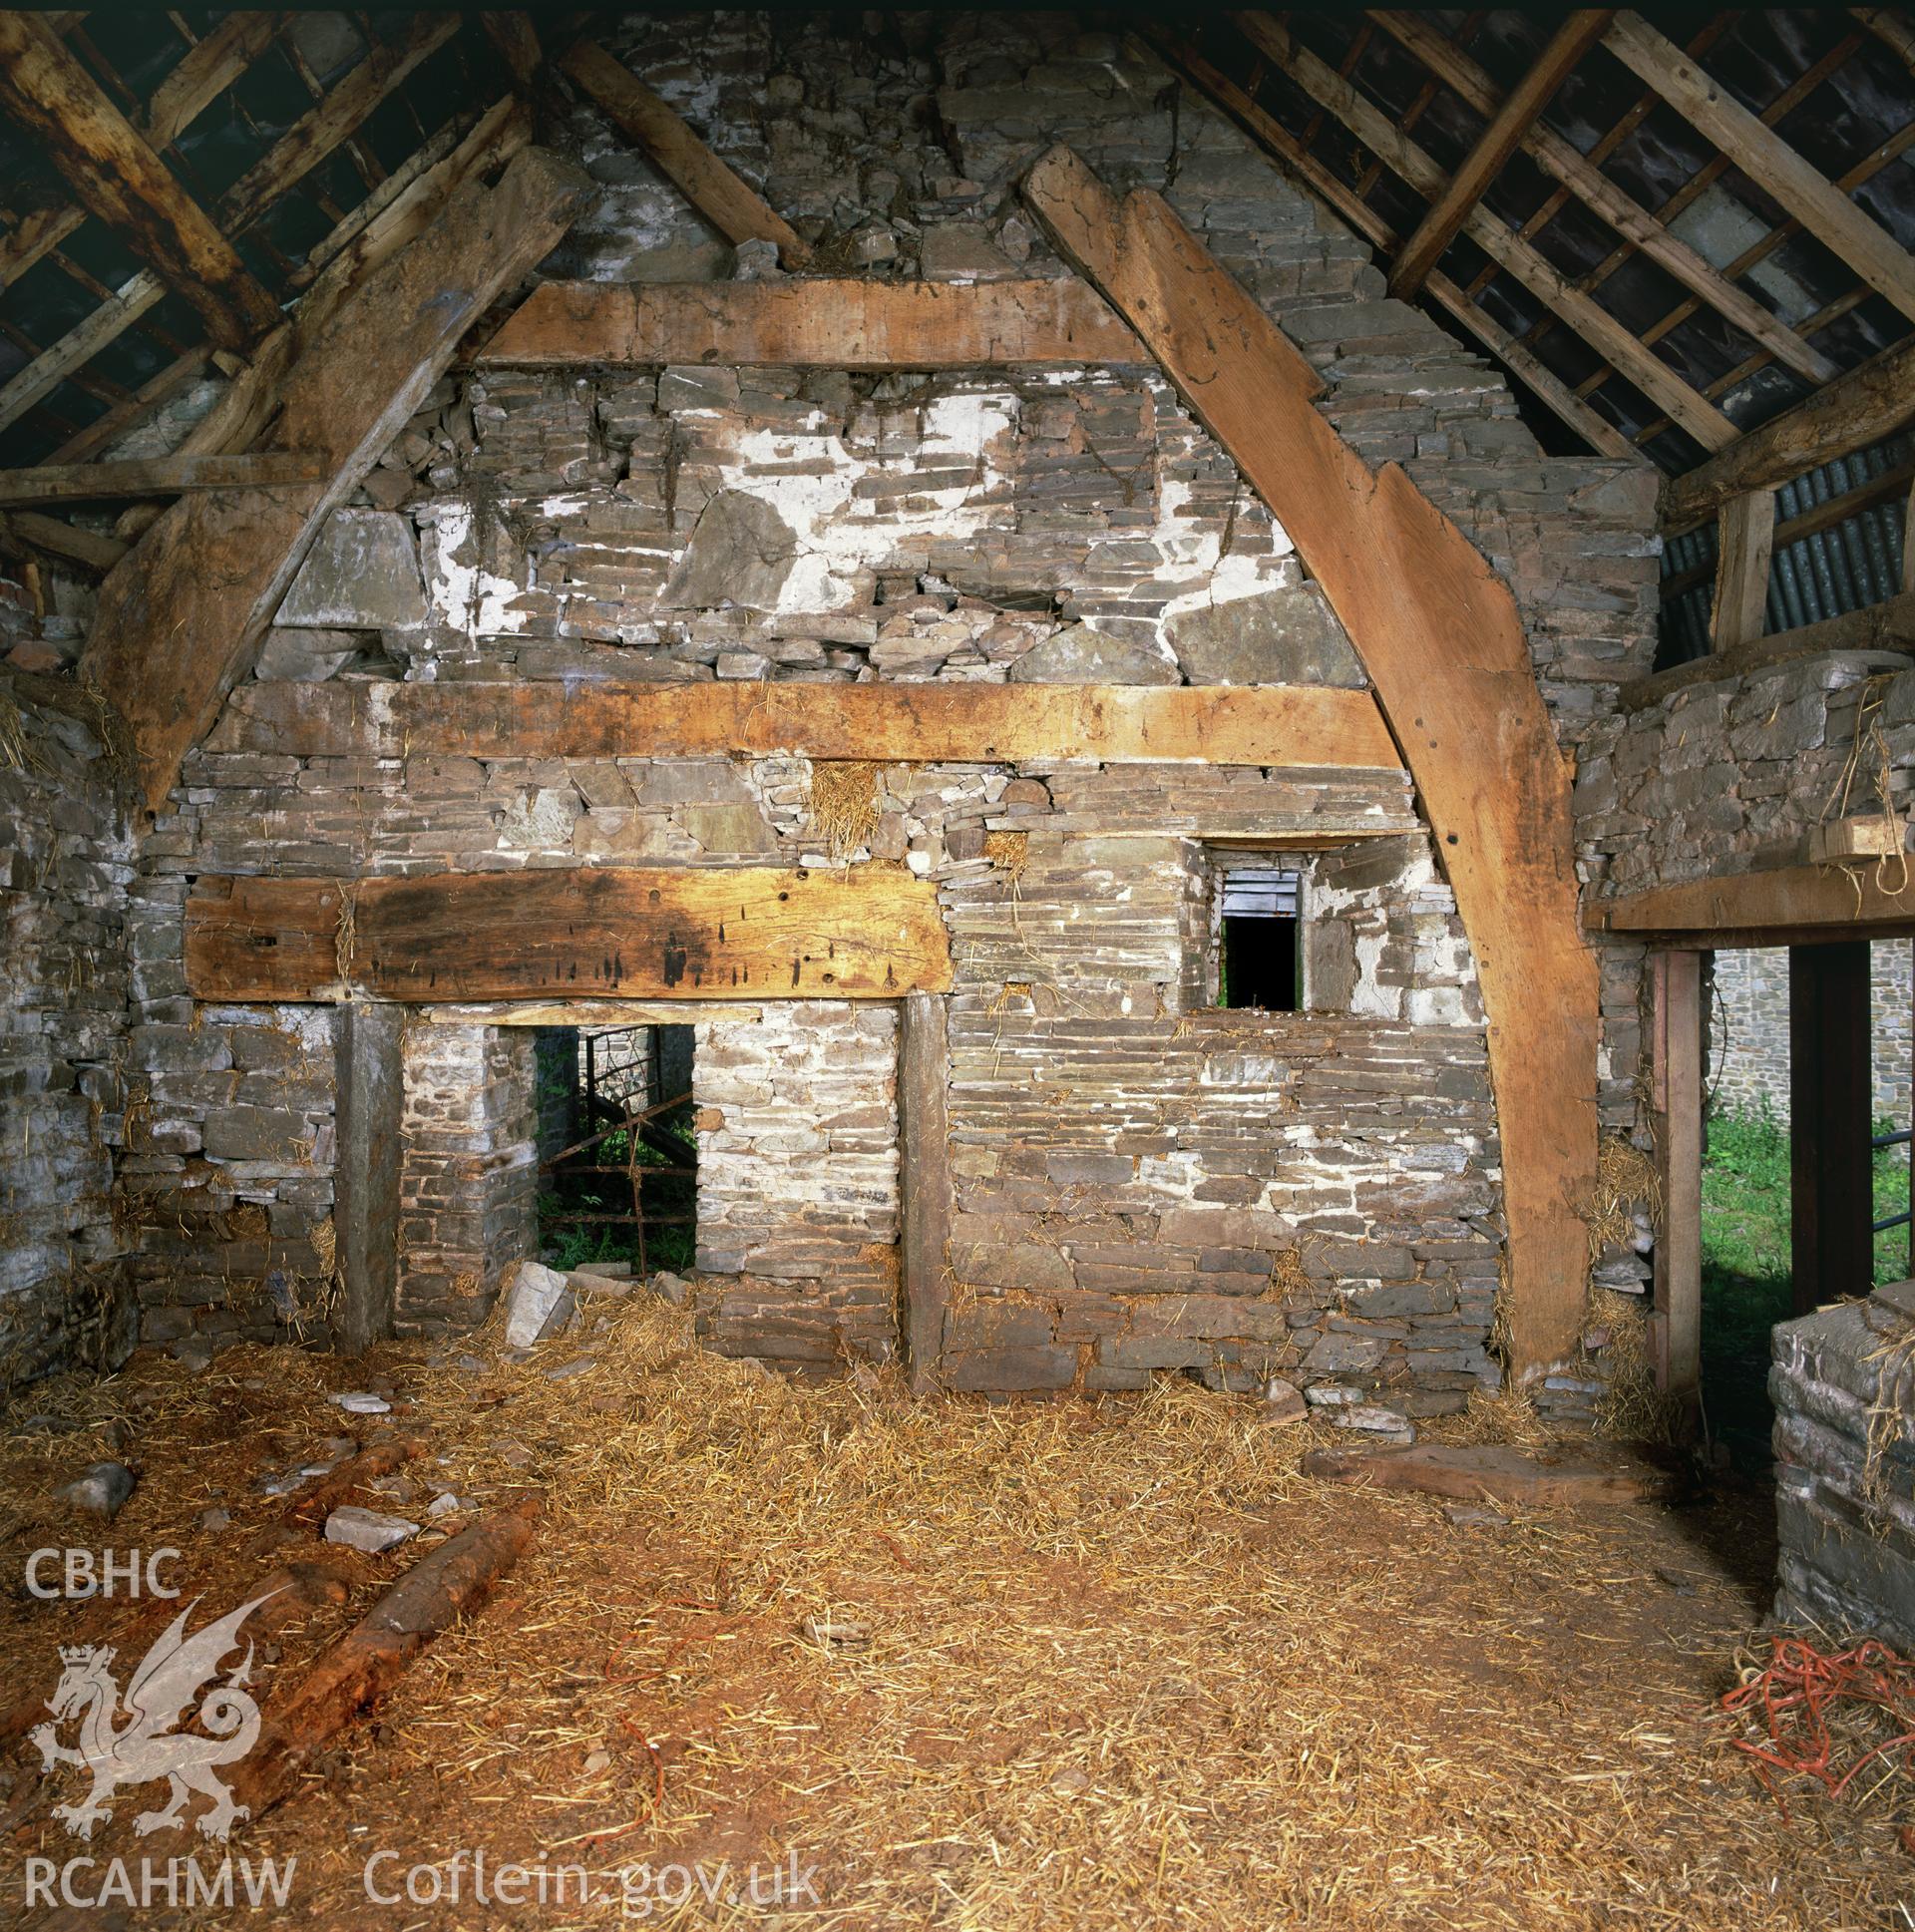 RCAHMW colour transparency showing  the cruck frame of the cowhouse at Clyro Court Farm, taken by Fleur James, August 2003